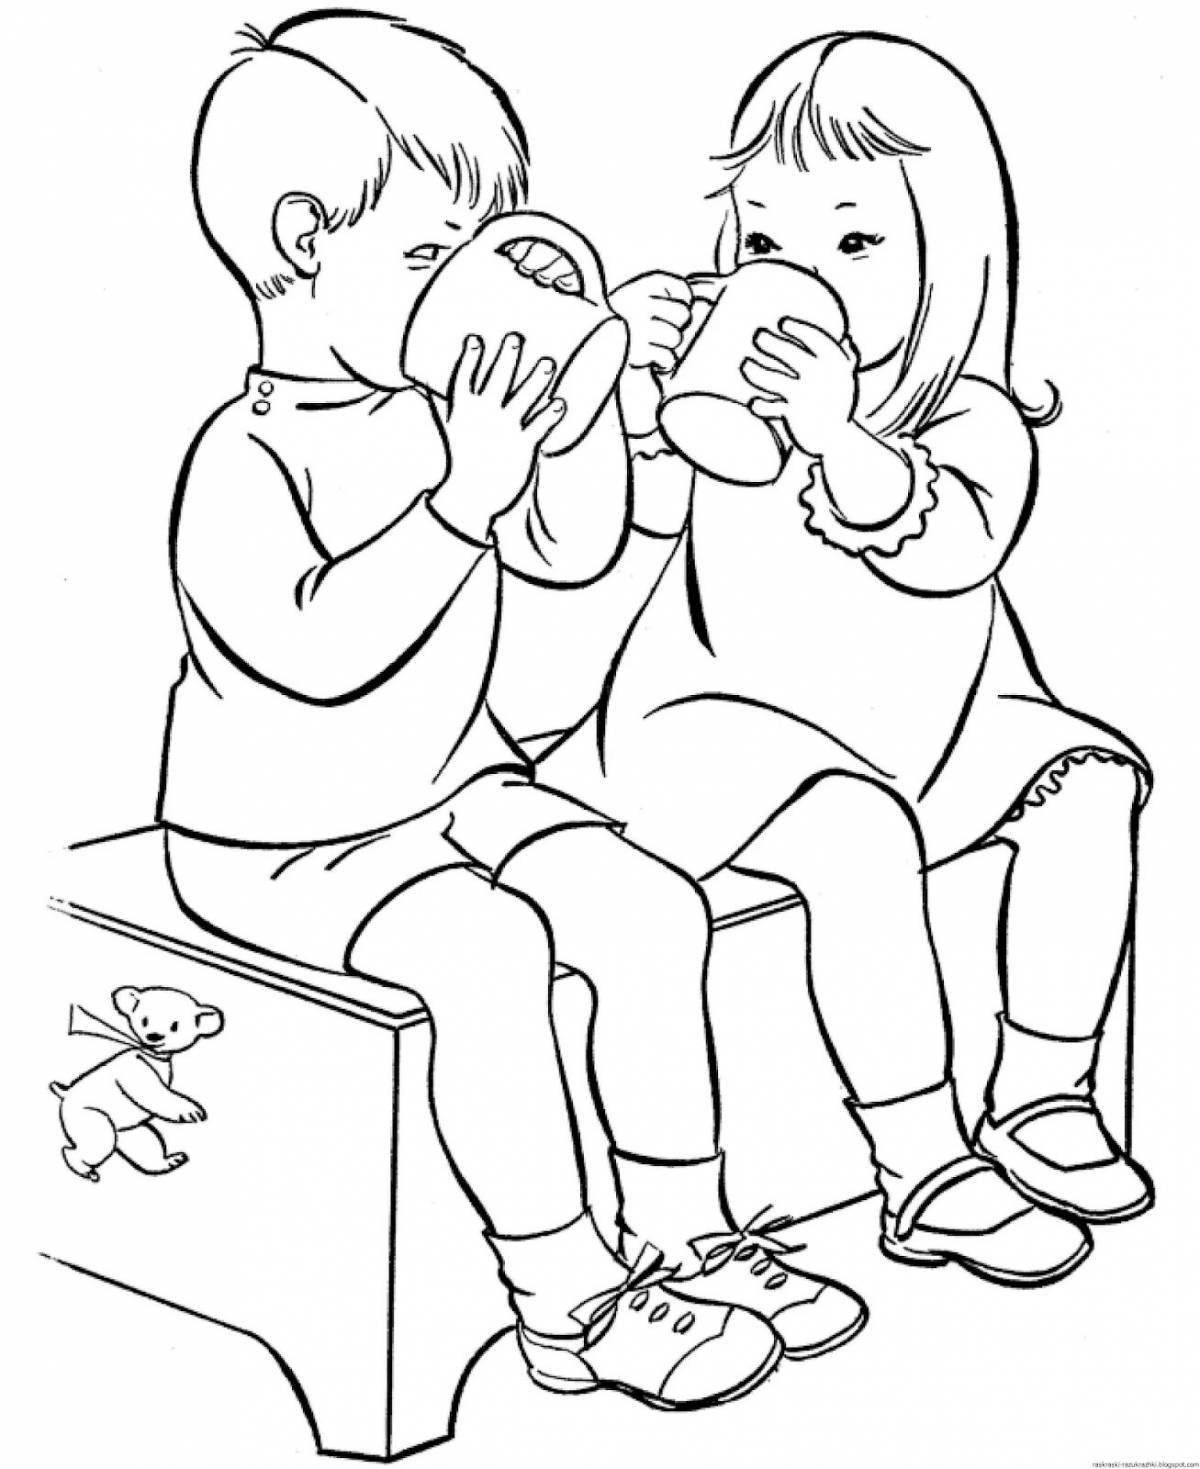 Coloring pages people for kids